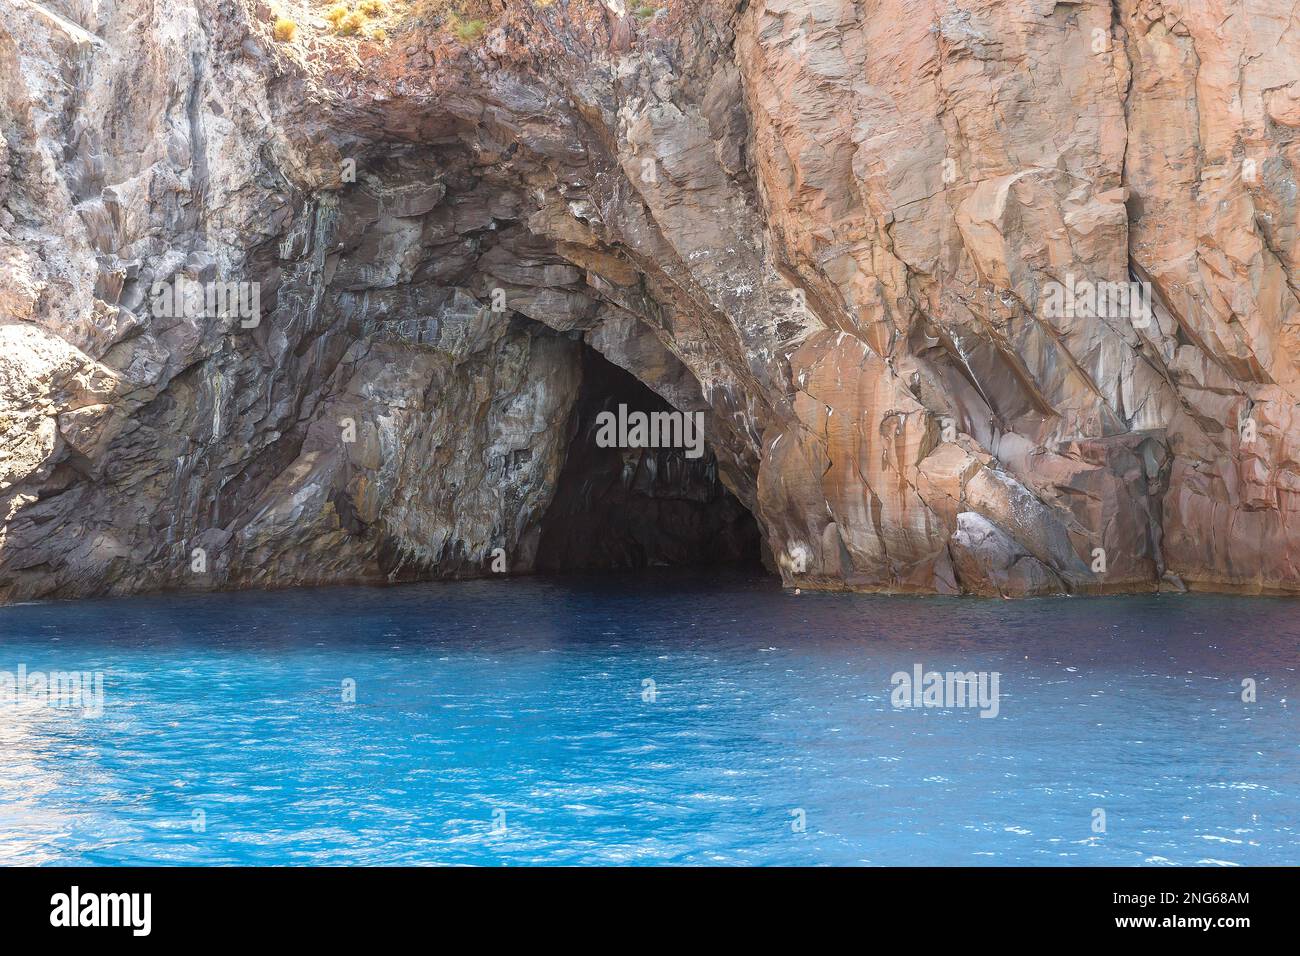 Amazing Seascapes of The Aeolian Islands (Isole Eolie) in Lipari, Messina Province, Sicily, Italy. Stock Photo